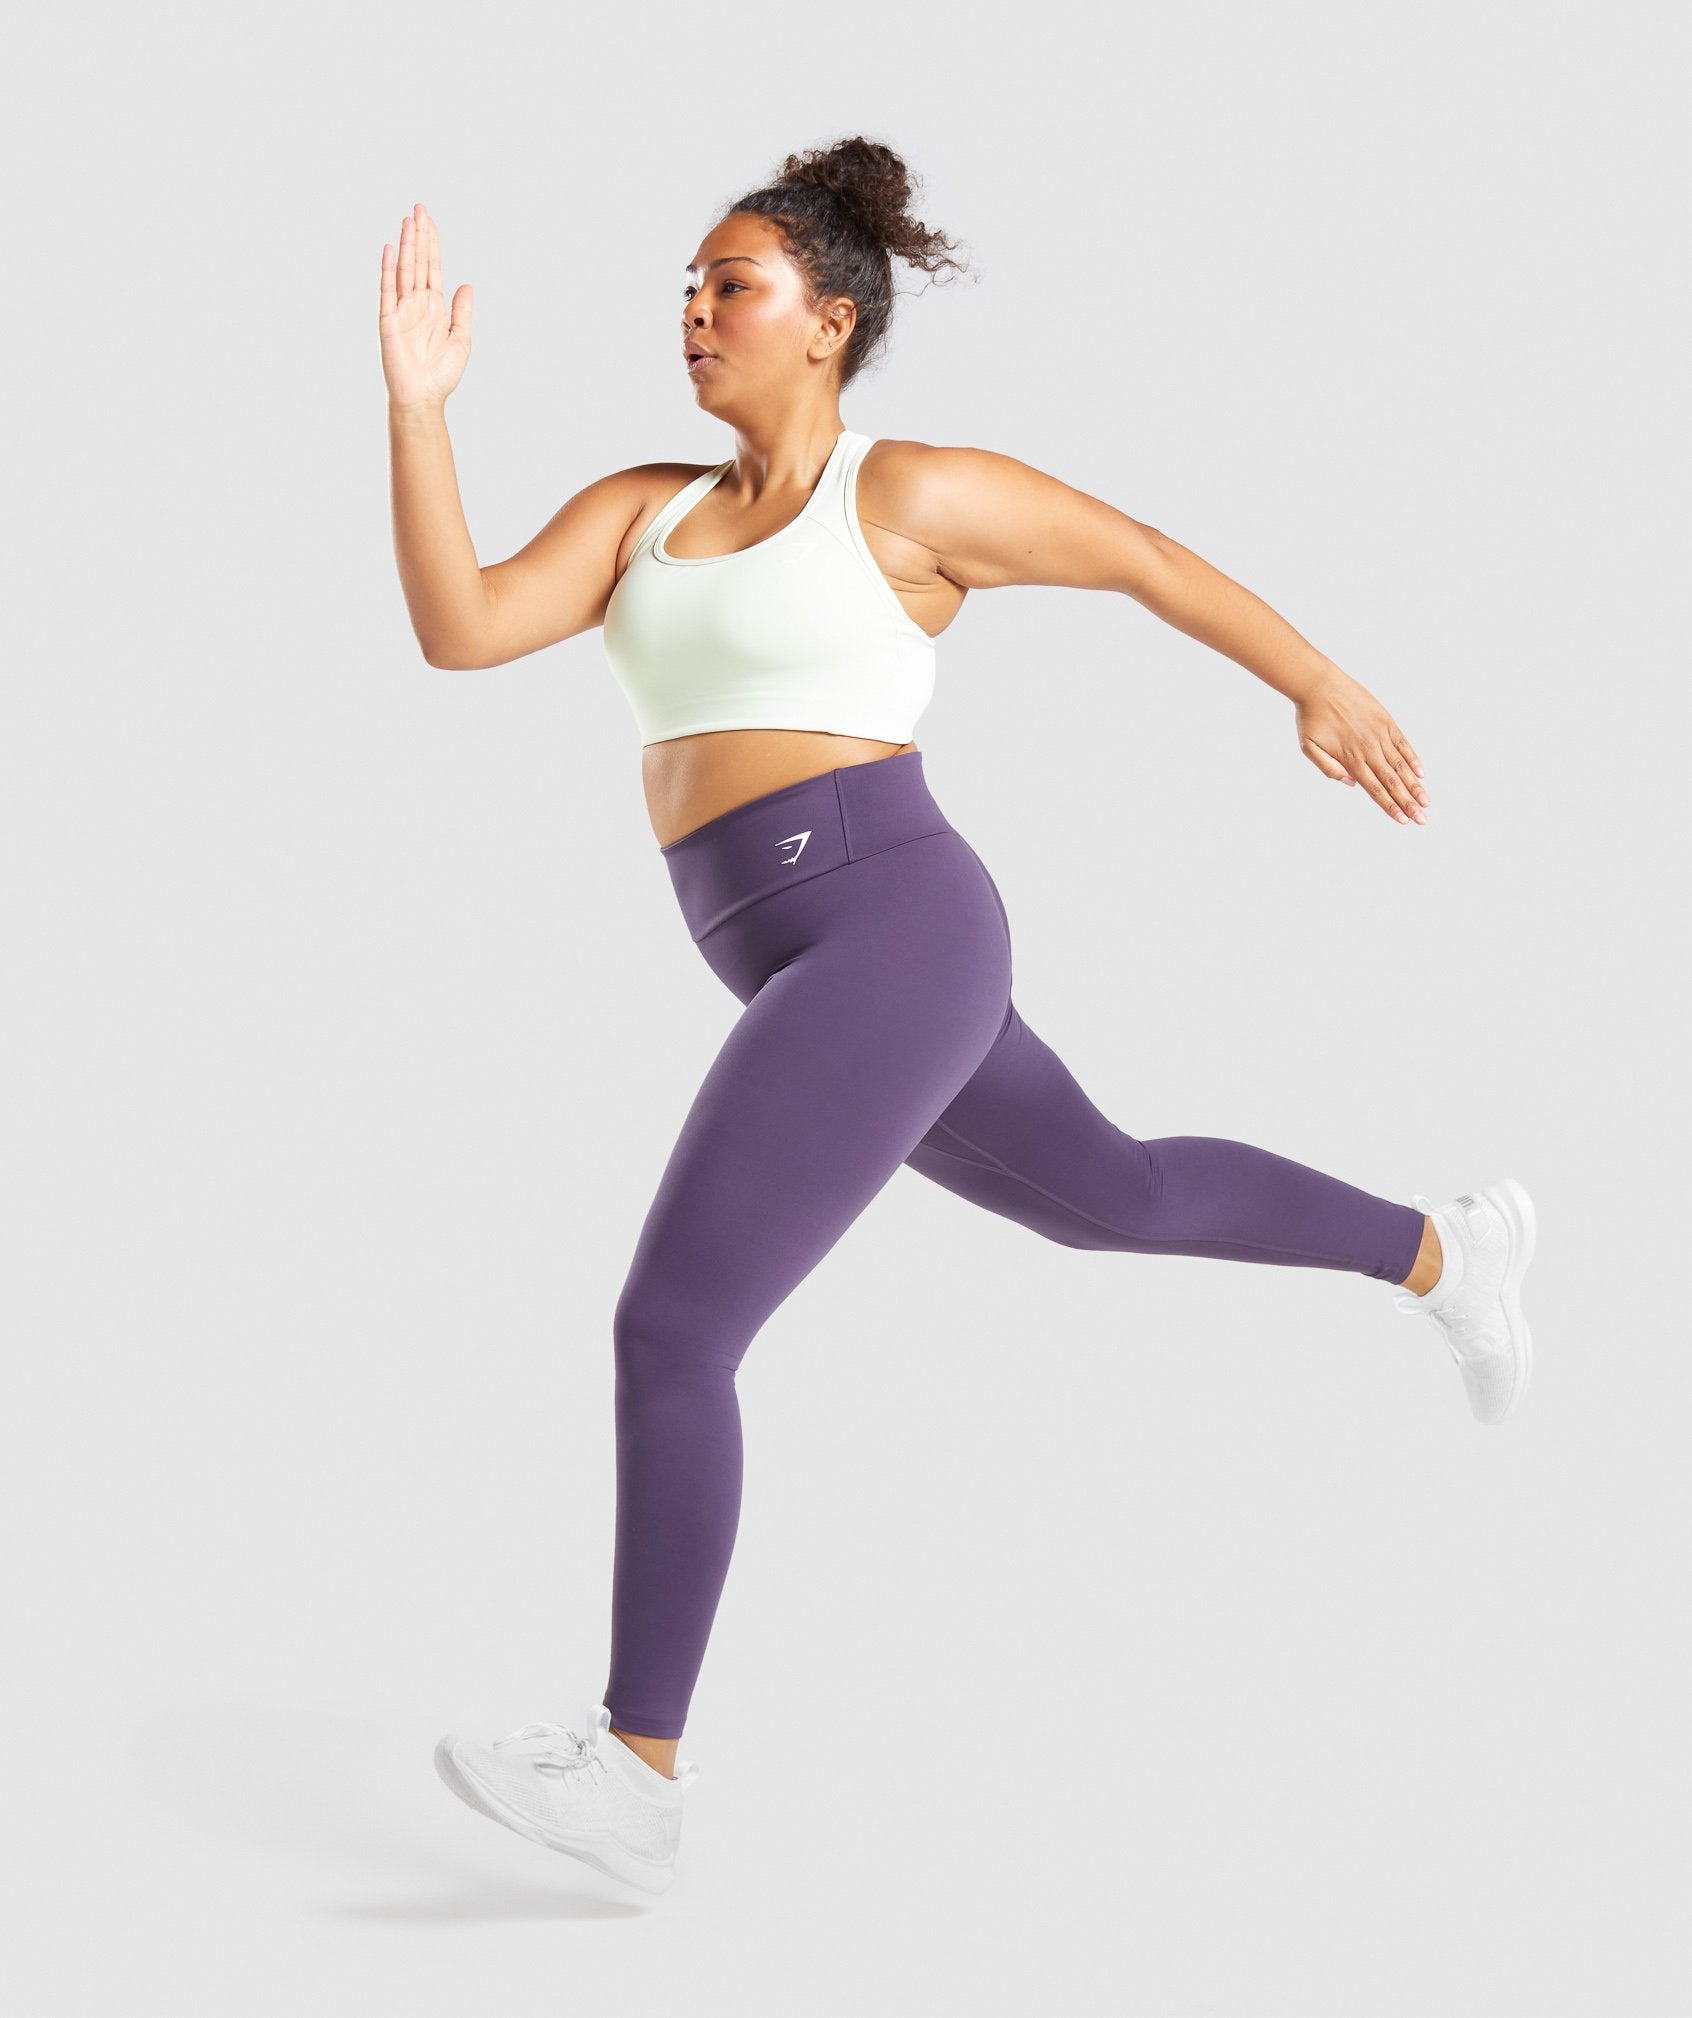 Athletic Leggings, XL Purple - $25 (34% Off Retail) New With Tags